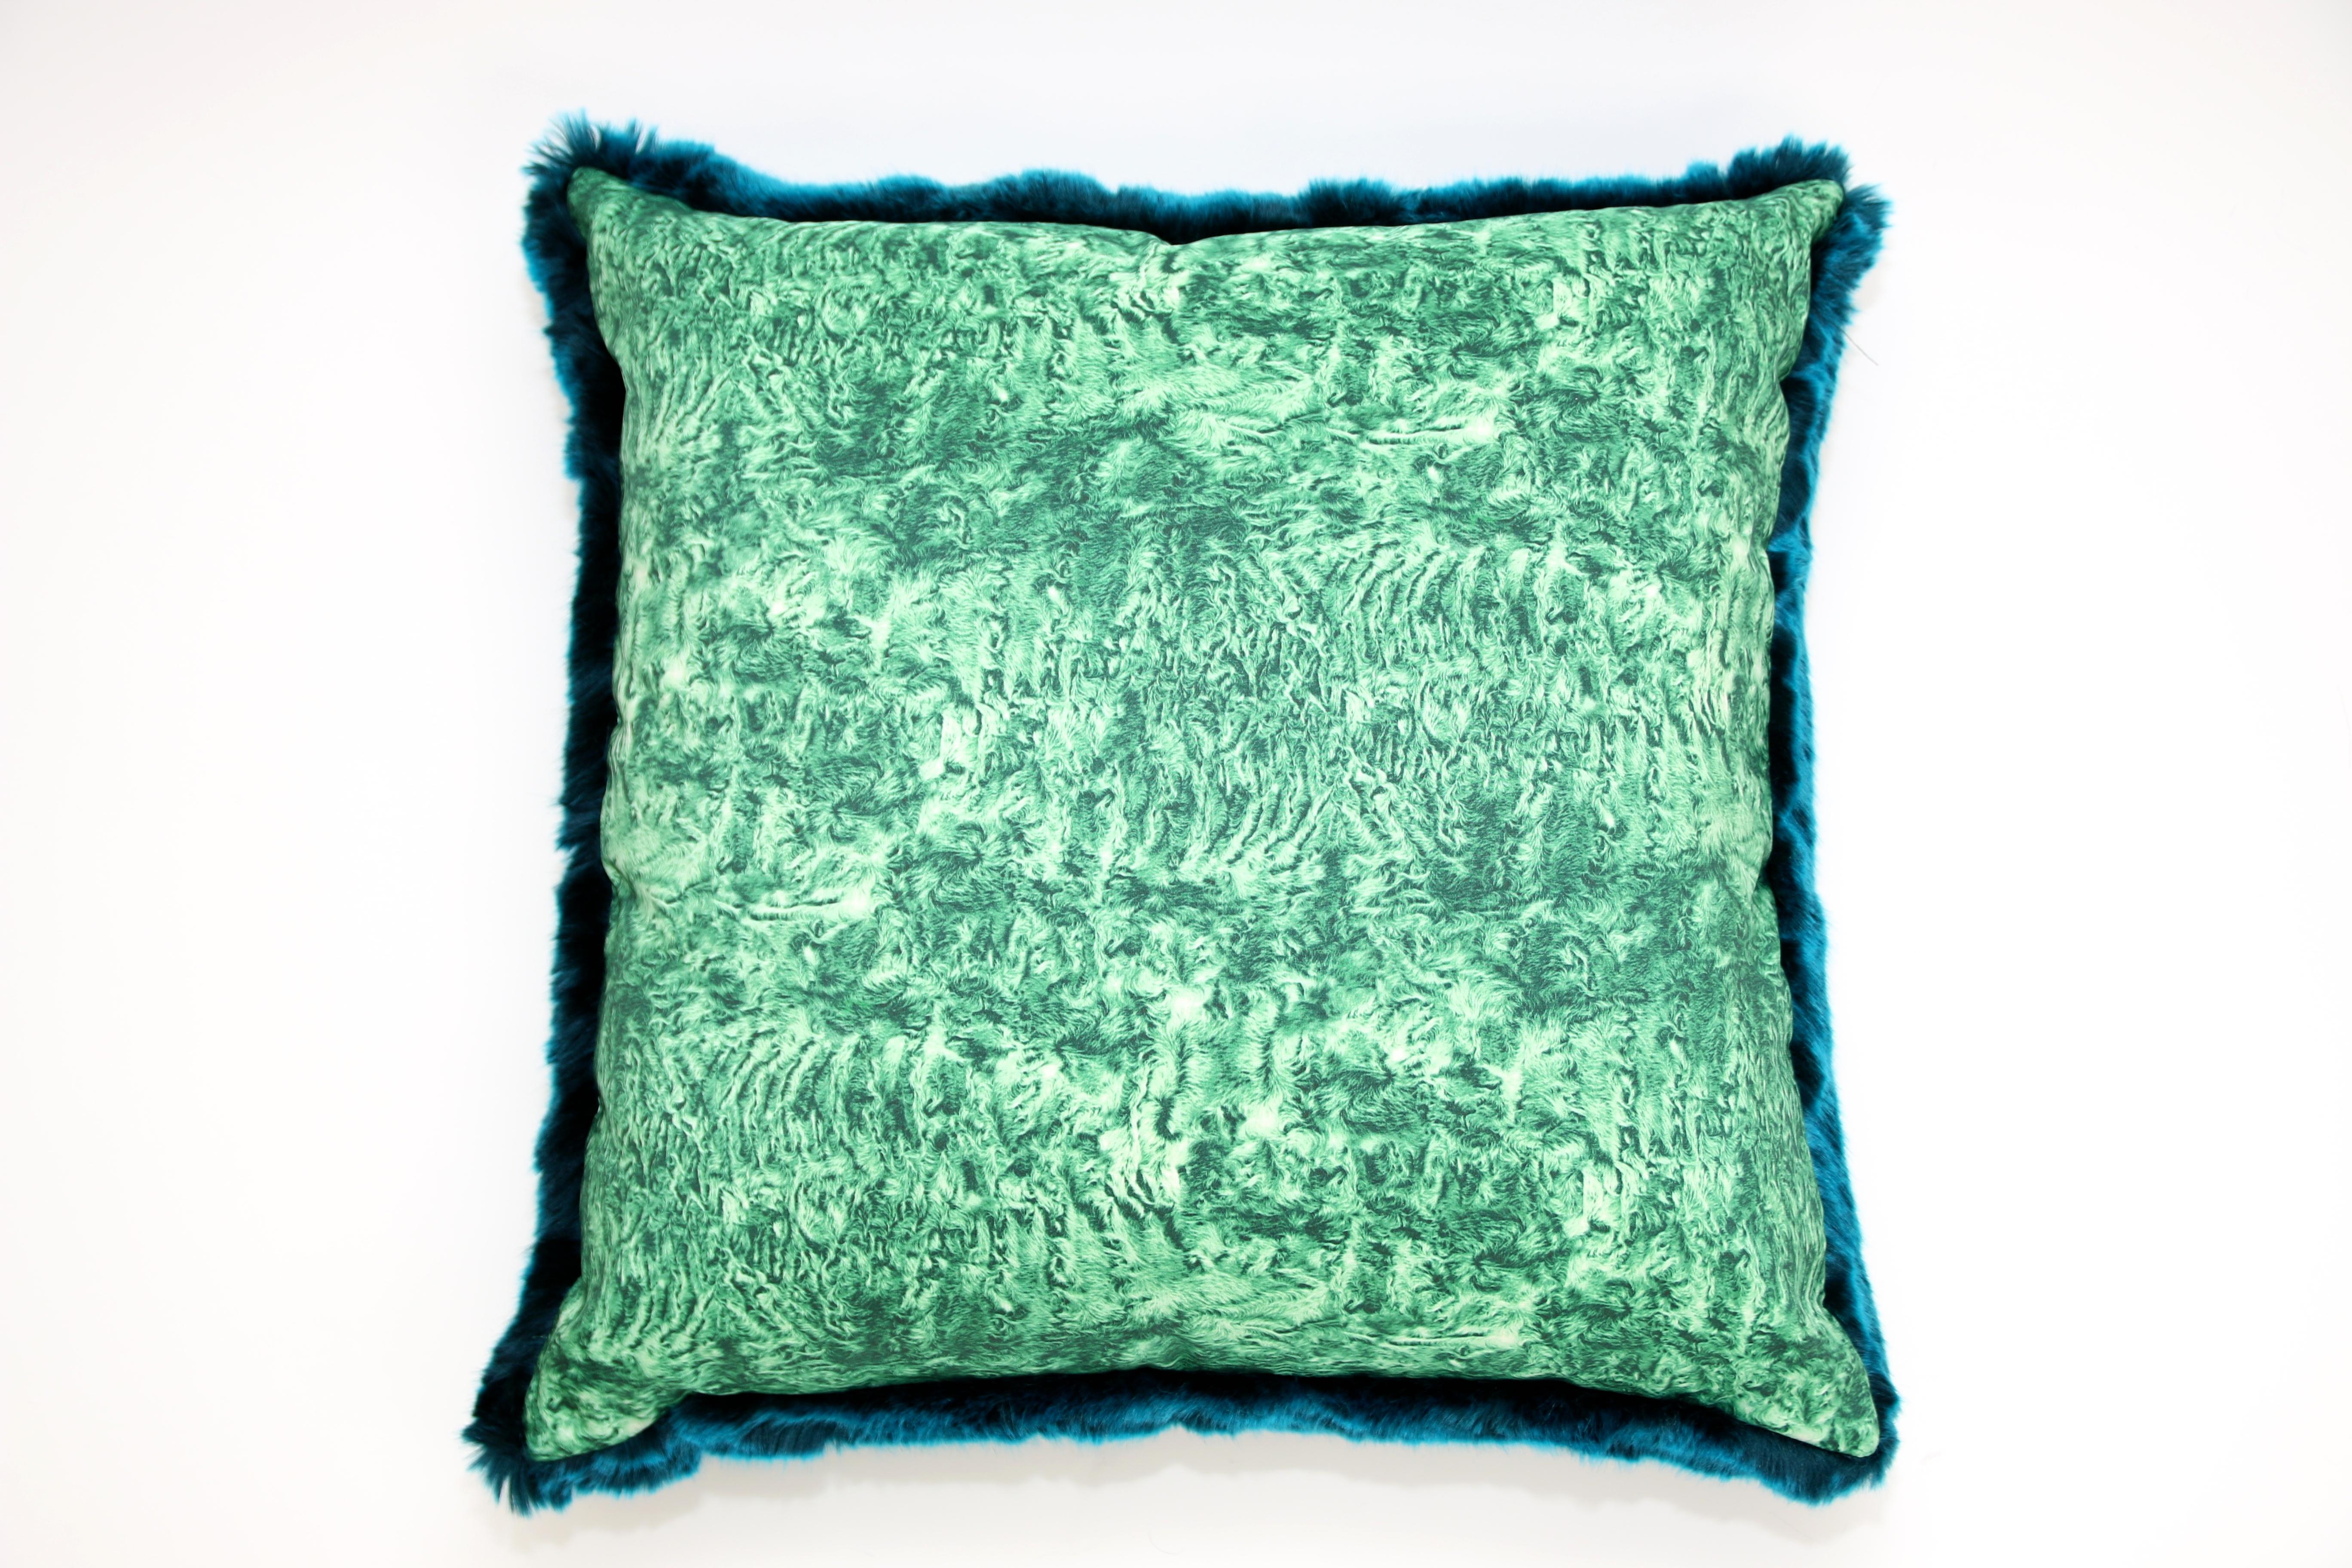 This pair of Pelush teal chinchilla faux fur large throw pillows are made with the highest quality man made pelage and is a beautiful replica of the chinchilla fur. Extra soft and silky to the touch, they can be reverse to a beautiful Italian faille